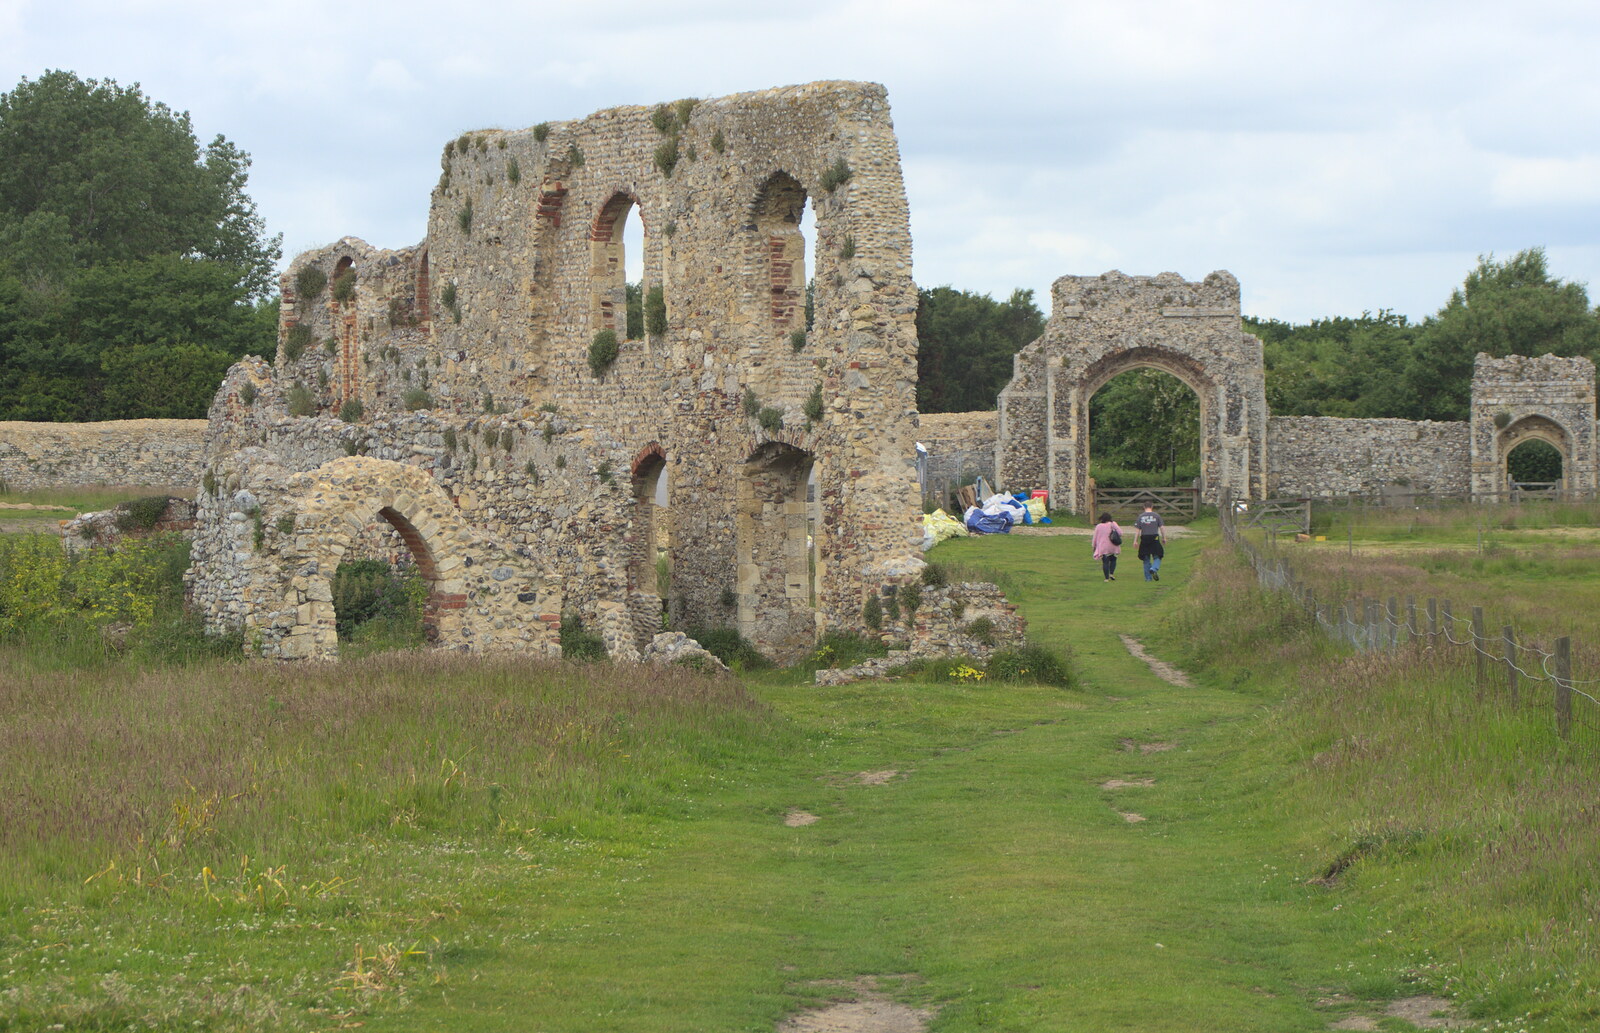 The ruins of Dunwich Abbey from Petrol Station Destruction, and a Cliff House Camping Trip, Southwark and Dunwich, Suffolk - 30th June 2013